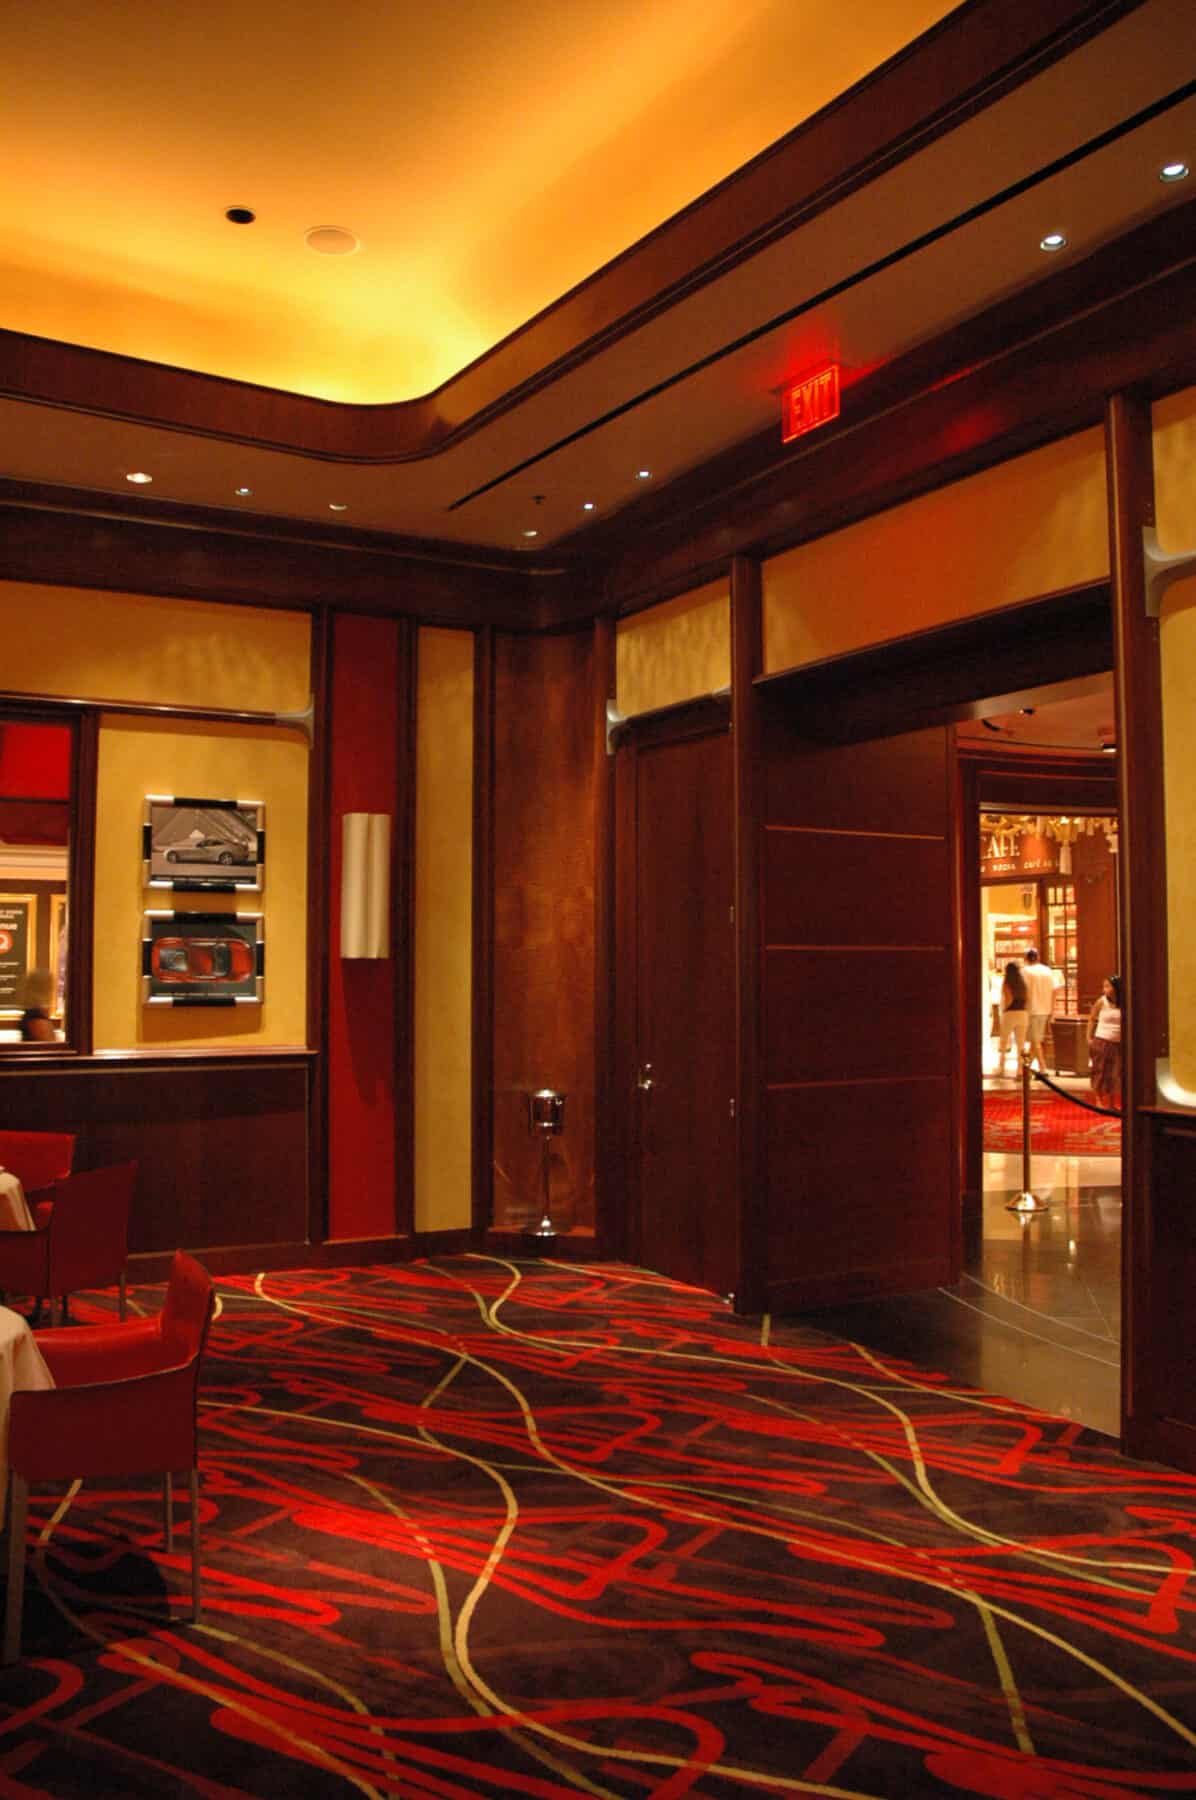 Custom Fabrication & Custom Woodworking. Specialty Contractors S&E Design Build Featured Project: Wynn Hotel